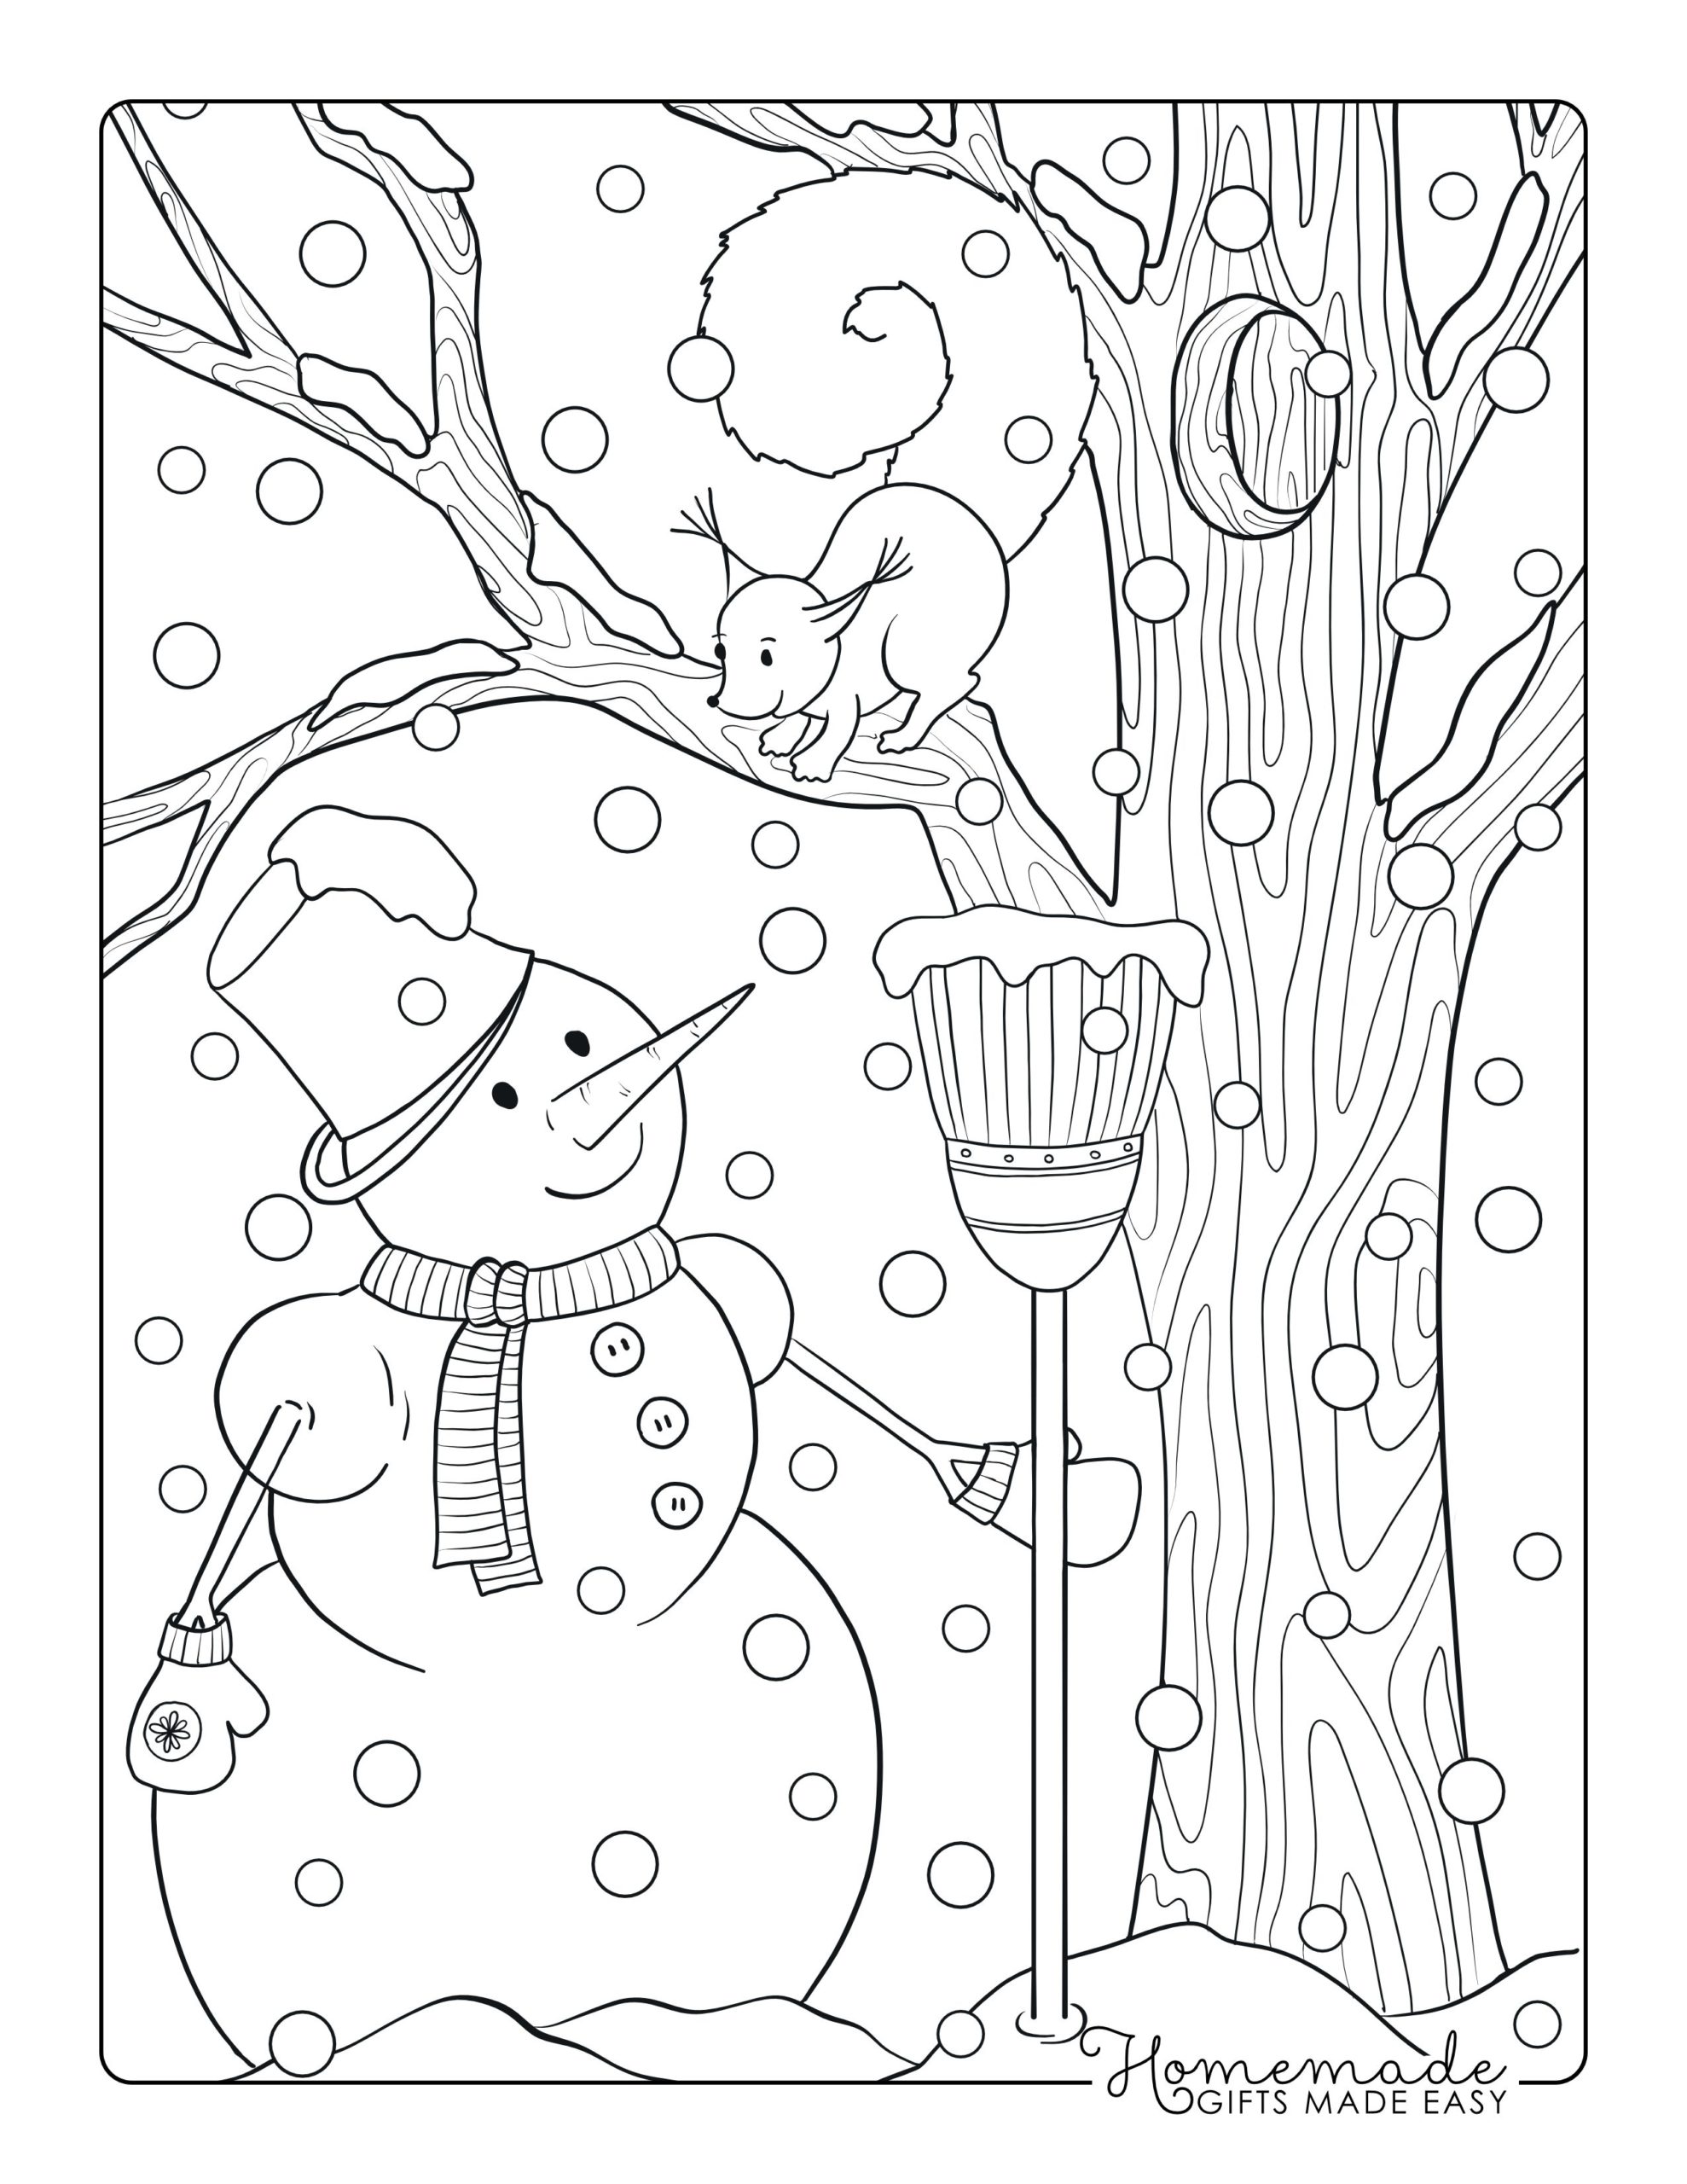 melting snowman coloring pages | images of snowman coloring pages | snowman printable coloring pages